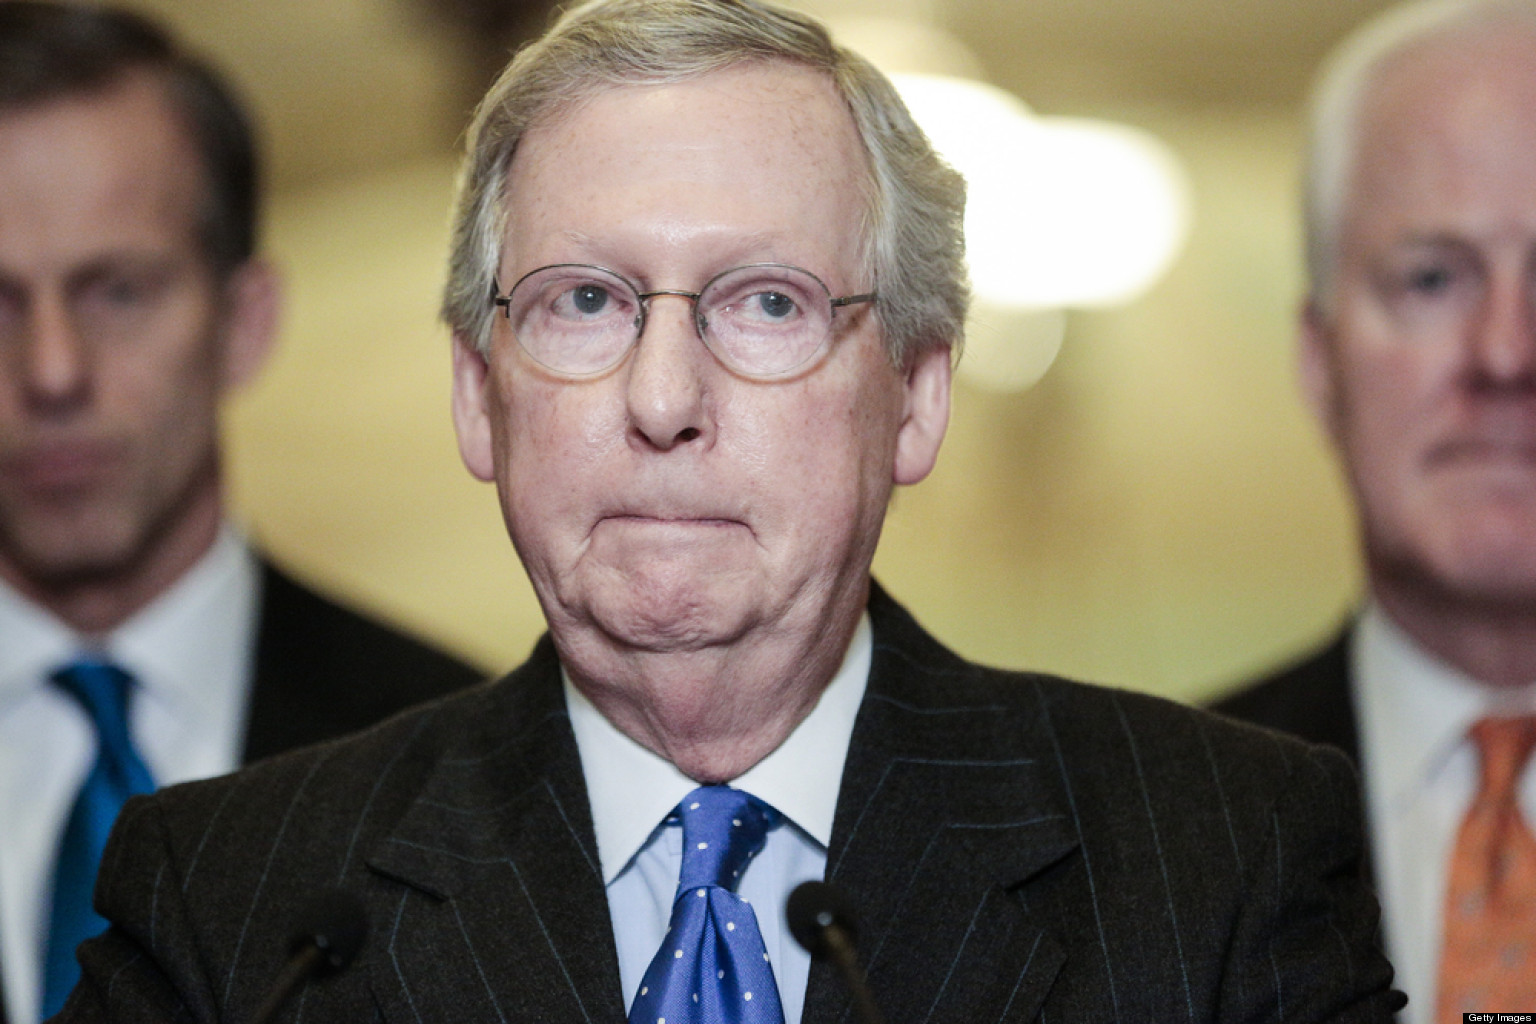 Mitch McConnell Hit With Ethics Complaint Over Leaked Ashley Judd Tape | HuffPost